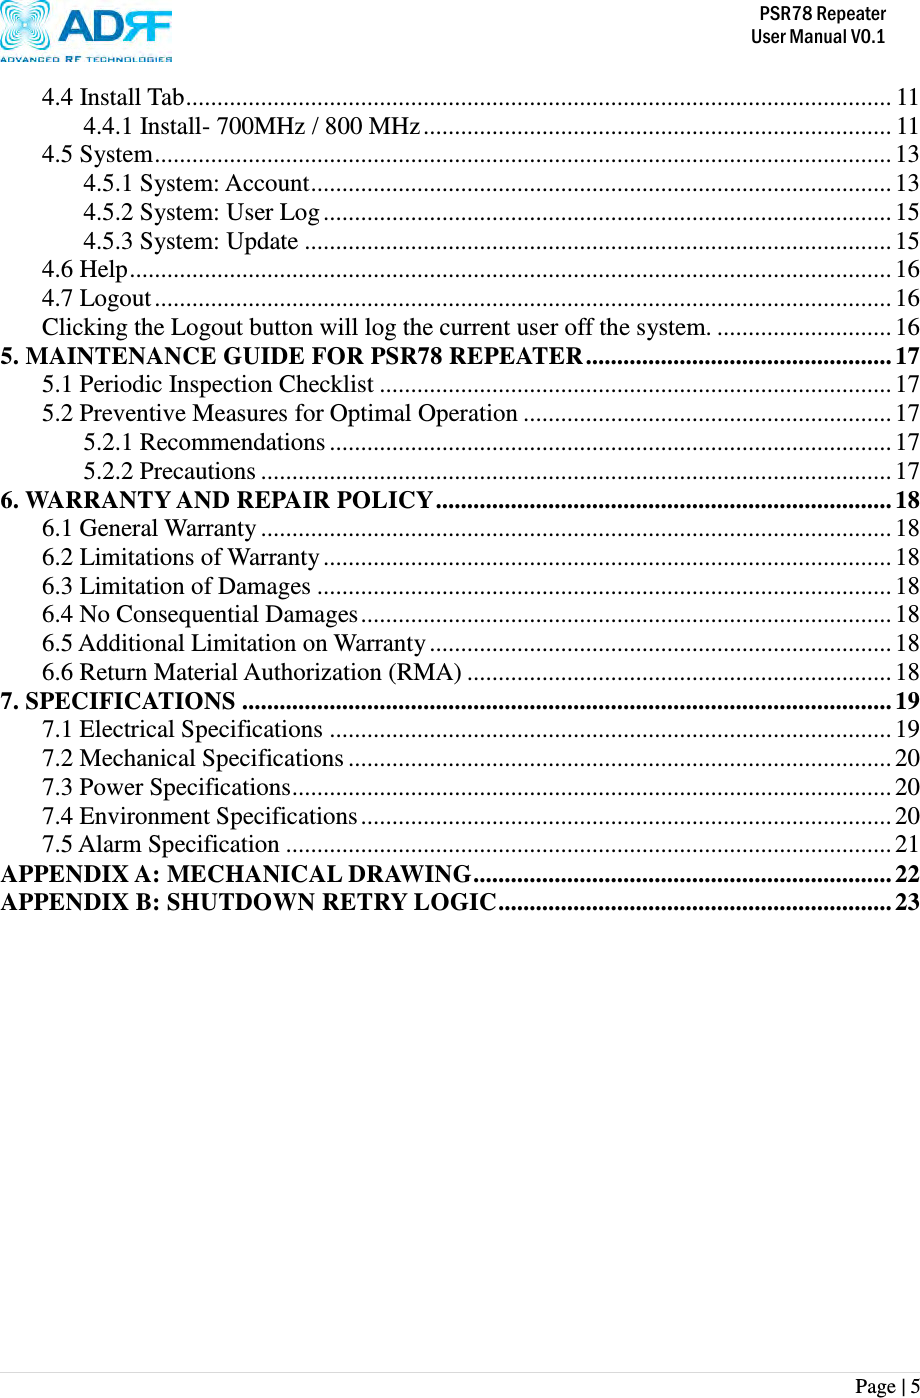           PSR78 Repeater     User Manual V0.1 Page | 5    4.4 Install Tab ................................................................................................................. 11 4.4.1 Install- 700MHz / 800 MHz ........................................................................... 11 4.5 System ...................................................................................................................... 13 4.5.1 System: Account ............................................................................................. 13 4.5.2 System: User Log ........................................................................................... 15 4.5.3 System: Update .............................................................................................. 15 4.6 Help .......................................................................................................................... 16 4.7 Logout ...................................................................................................................... 16 Clicking the Logout button will log the current user off the system. ............................ 16 5. MAINTENANCE GUIDE FOR PSR78 REPEATER ................................................. 17 5.1 Periodic Inspection Checklist .................................................................................. 17 5.2 Preventive Measures for Optimal Operation ........................................................... 17 5.2.1 Recommendations .......................................................................................... 17 5.2.2 Precautions ..................................................................................................... 17 6. WARRANTY AND REPAIR POLICY ......................................................................... 18 6.1 General Warranty ..................................................................................................... 18 6.2 Limitations of Warranty ........................................................................................... 18 6.3 Limitation of Damages ............................................................................................ 18 6.4 No Consequential Damages ..................................................................................... 18 6.5 Additional Limitation on Warranty .......................................................................... 18 6.6 Return Material Authorization (RMA) .................................................................... 18 7. SPECIFICATIONS ........................................................................................................ 19 7.1 Electrical Specifications .......................................................................................... 19 7.2 Mechanical Specifications ....................................................................................... 20 7.3 Power Specifications ................................................................................................ 20 7.4 Environment Specifications ..................................................................................... 20 7.5 Alarm Specification ................................................................................................. 21 APPENDIX A: MECHANICAL DRAWING ................................................................... 22 APPENDIX B: SHUTDOWN RETRY LOGIC ............................................................... 23  